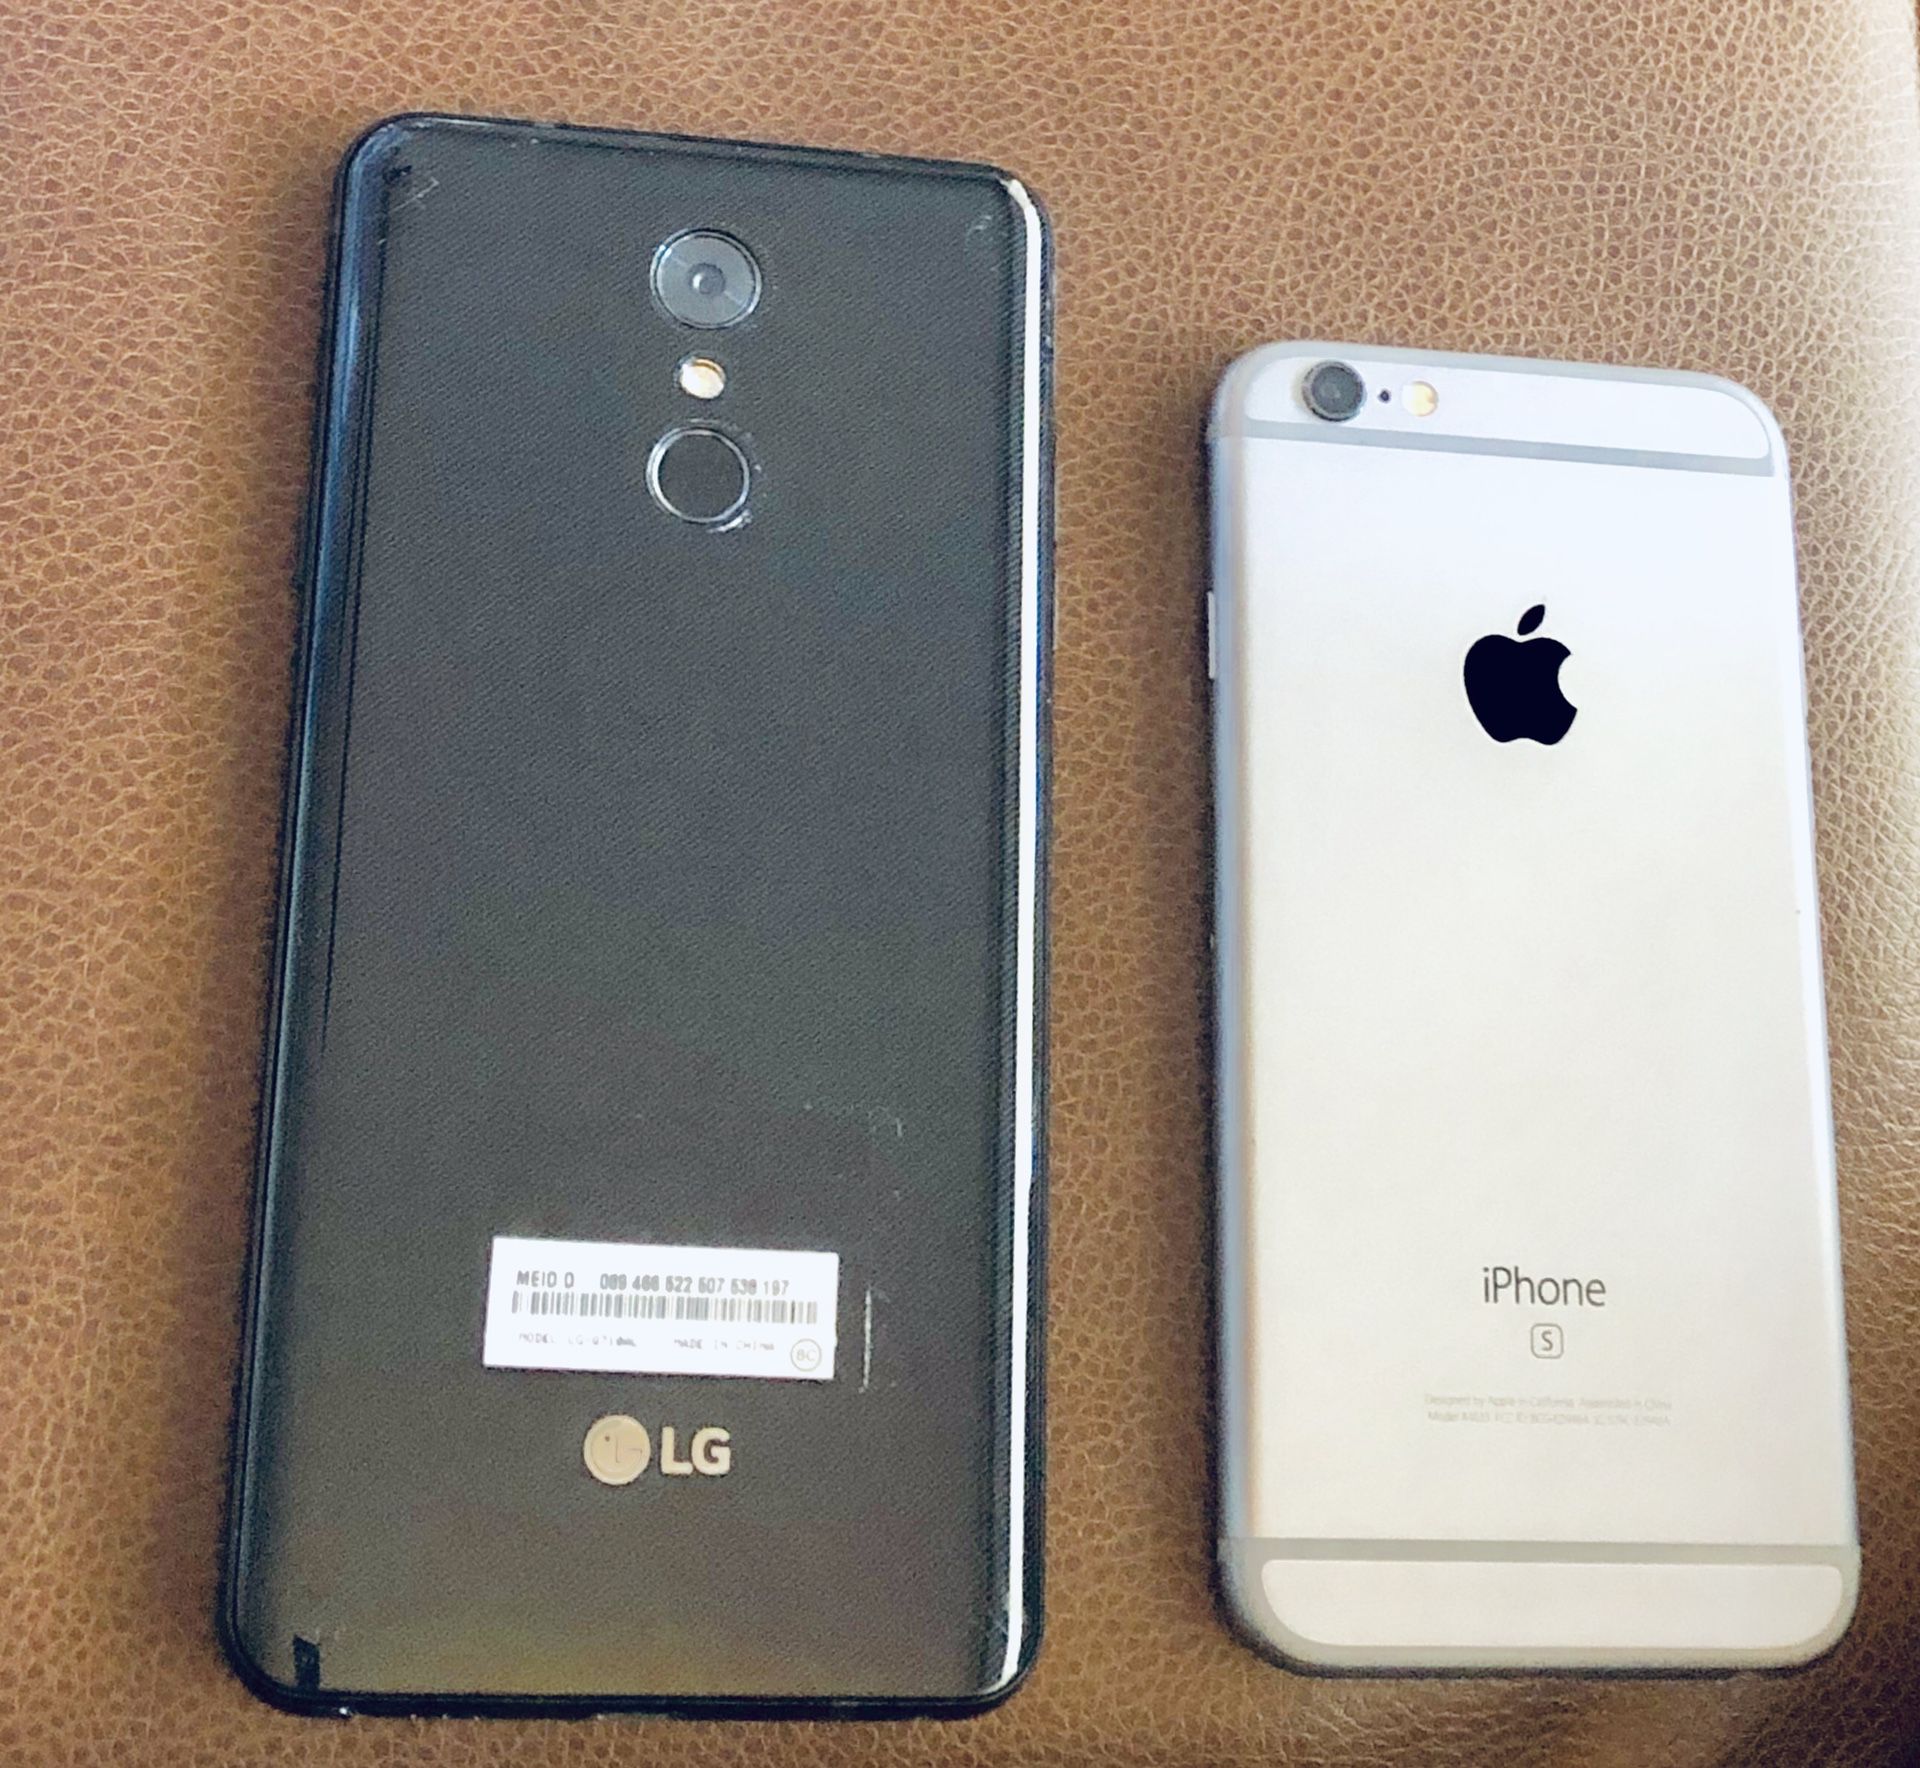 iPhone s and LG $100